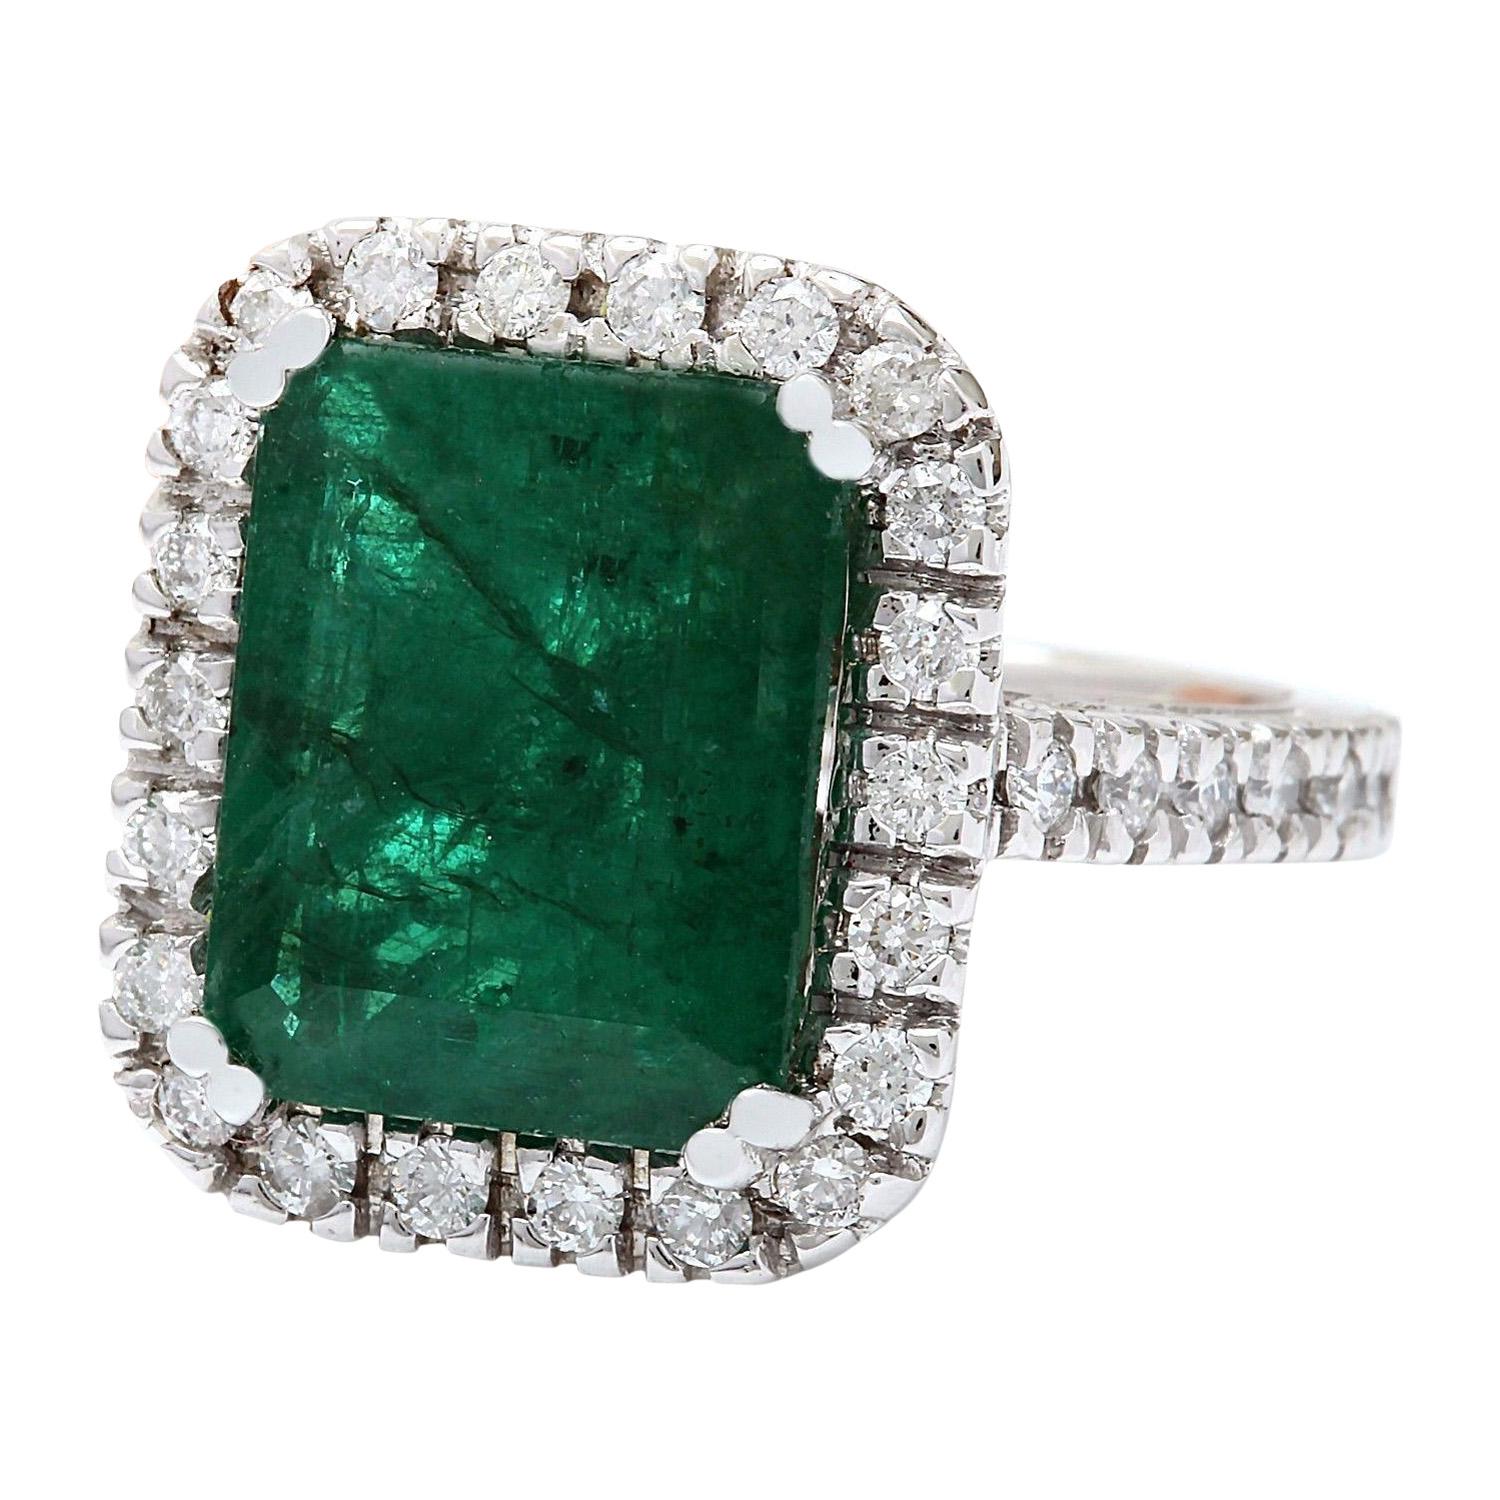 6.65 Carat Natural Emerald 14K Solid White Gold Diamond Ring
 Item Type: Ring
 Item Style: Engagement
 Material: 14K White Gold
 Mainstone: Emerald
 Stone Color: Green
 Stone Weight: 5.85 Carat
 Stone Shape: Princess
 Stone Quantity: 1
 Stone